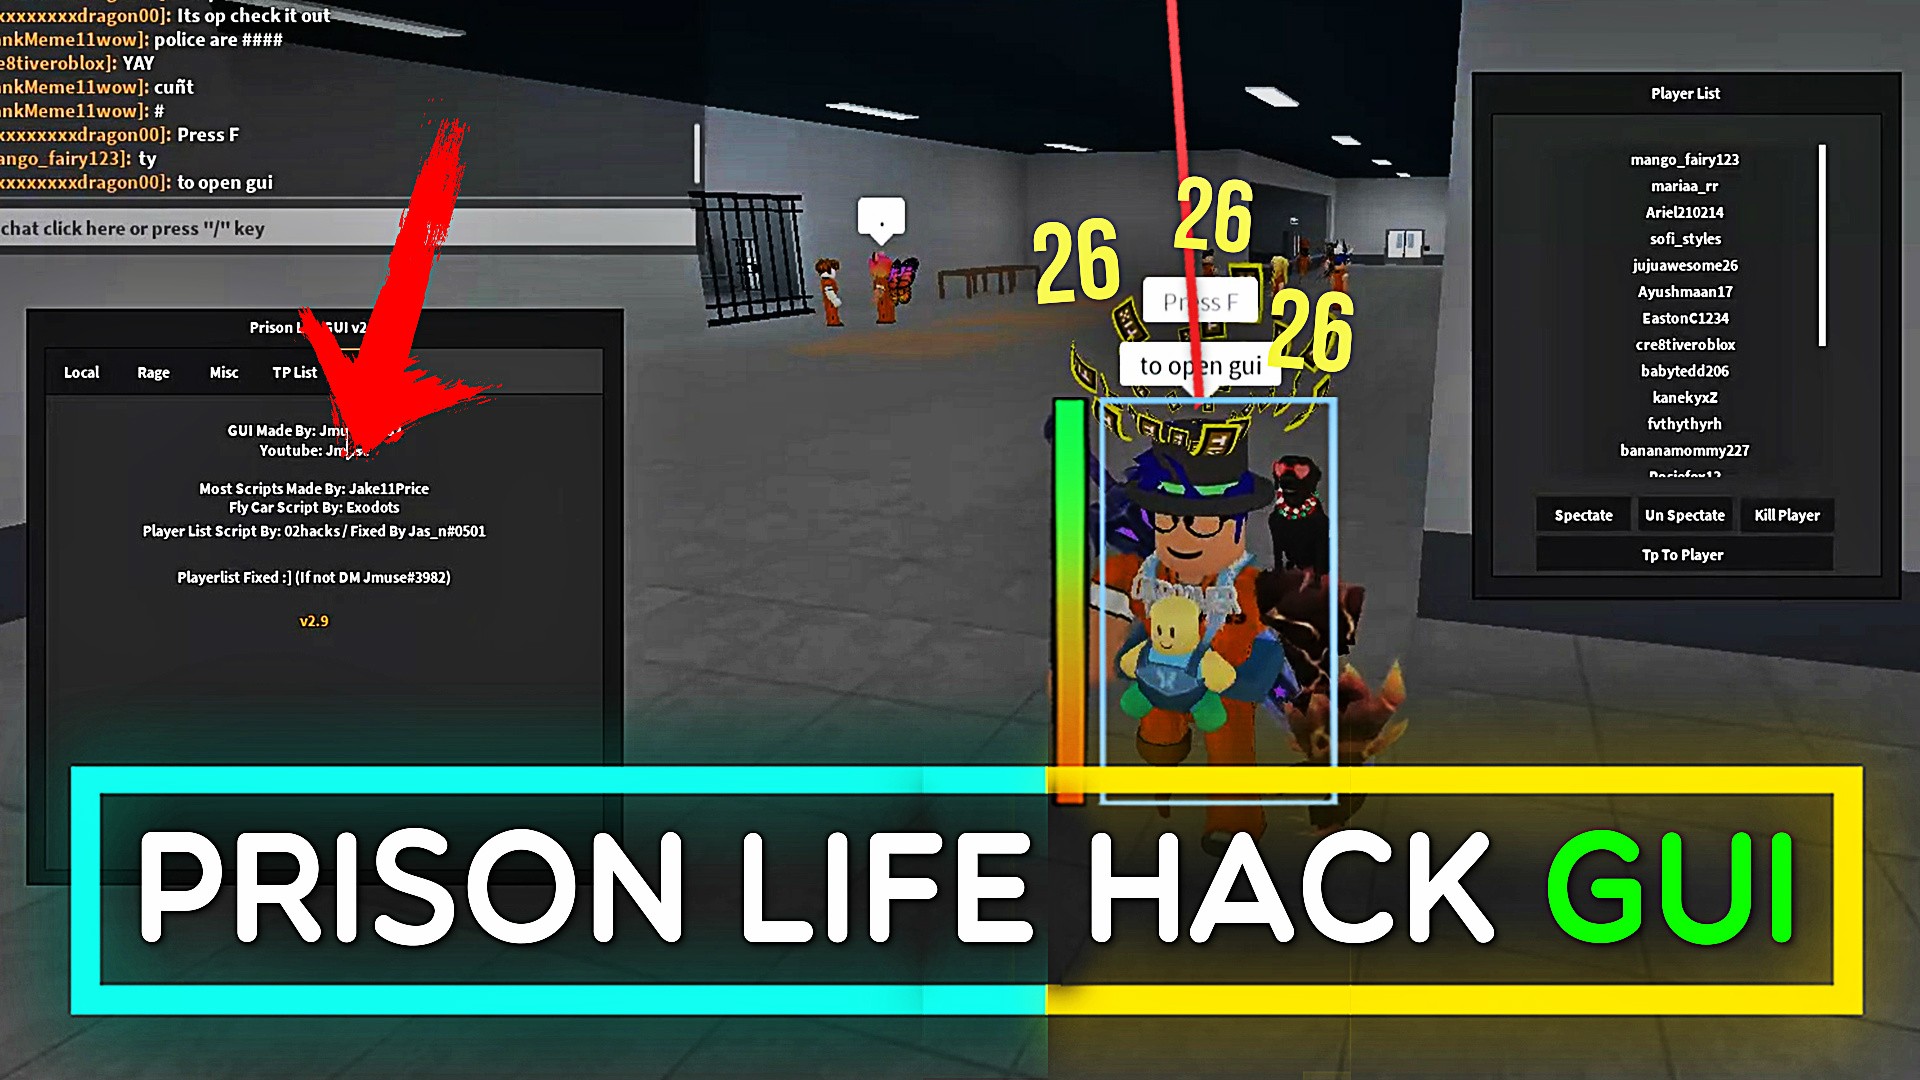 Prison Life OP GUI! KILL ALL, KEYCARD, GUNS AND WAY MORE! — Teletype